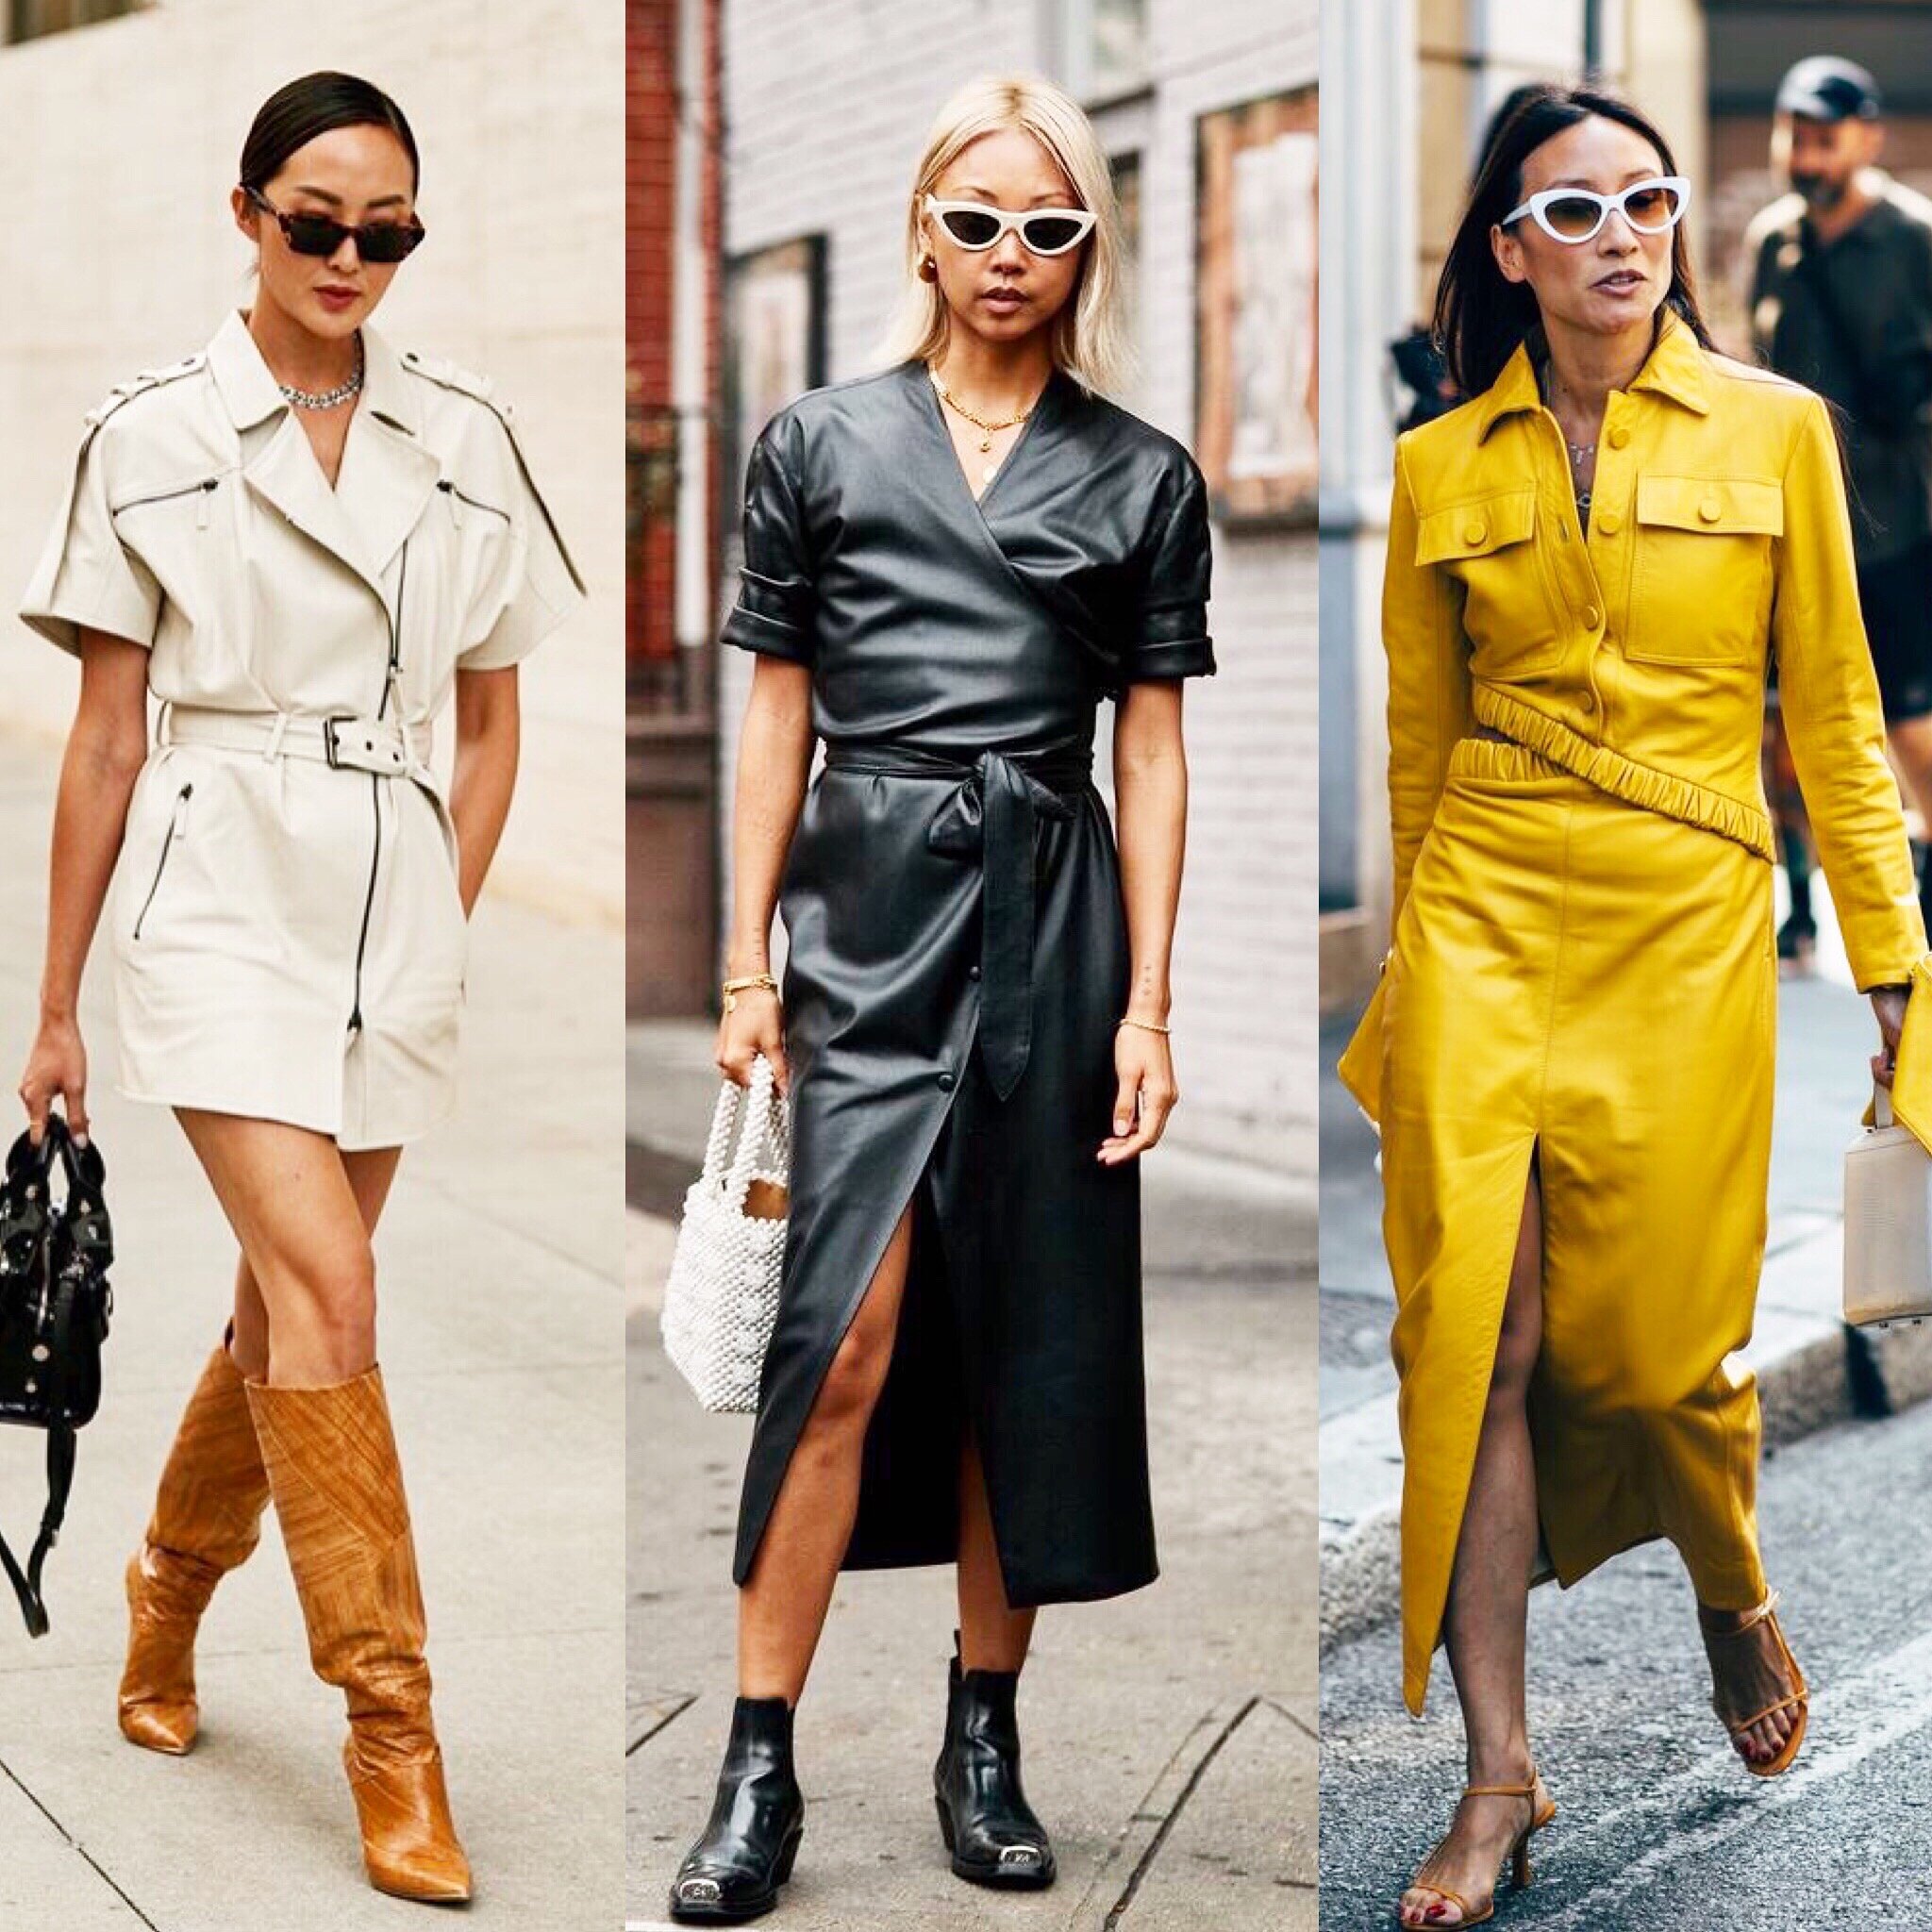   The easiest way to ease into leather dresses is to choose a silhouette you already love. Whether it’s a wrap dress or a shirt dress, opting for a leather version immediately elevates the look. For longer dresses, I’m super into a thigh slit moment 